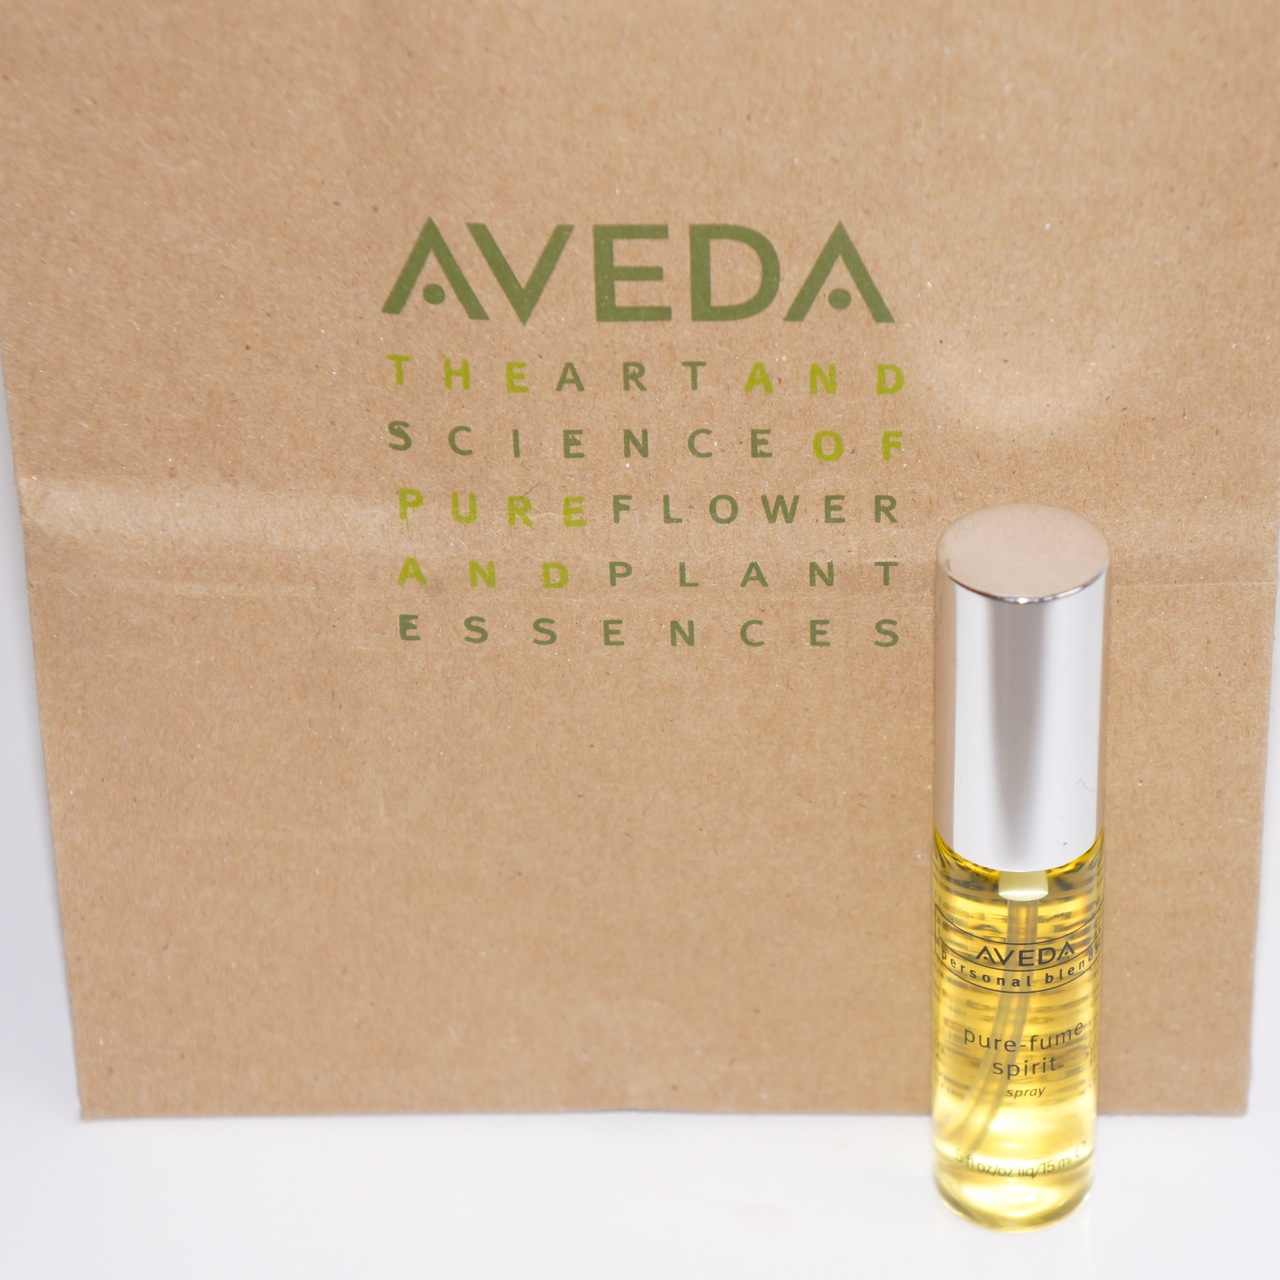 Aveda To Receive A Free Customized Birthday Gift Valued At Up 25 This Year I Chose The Pure Fume Spirit Spray Value 20